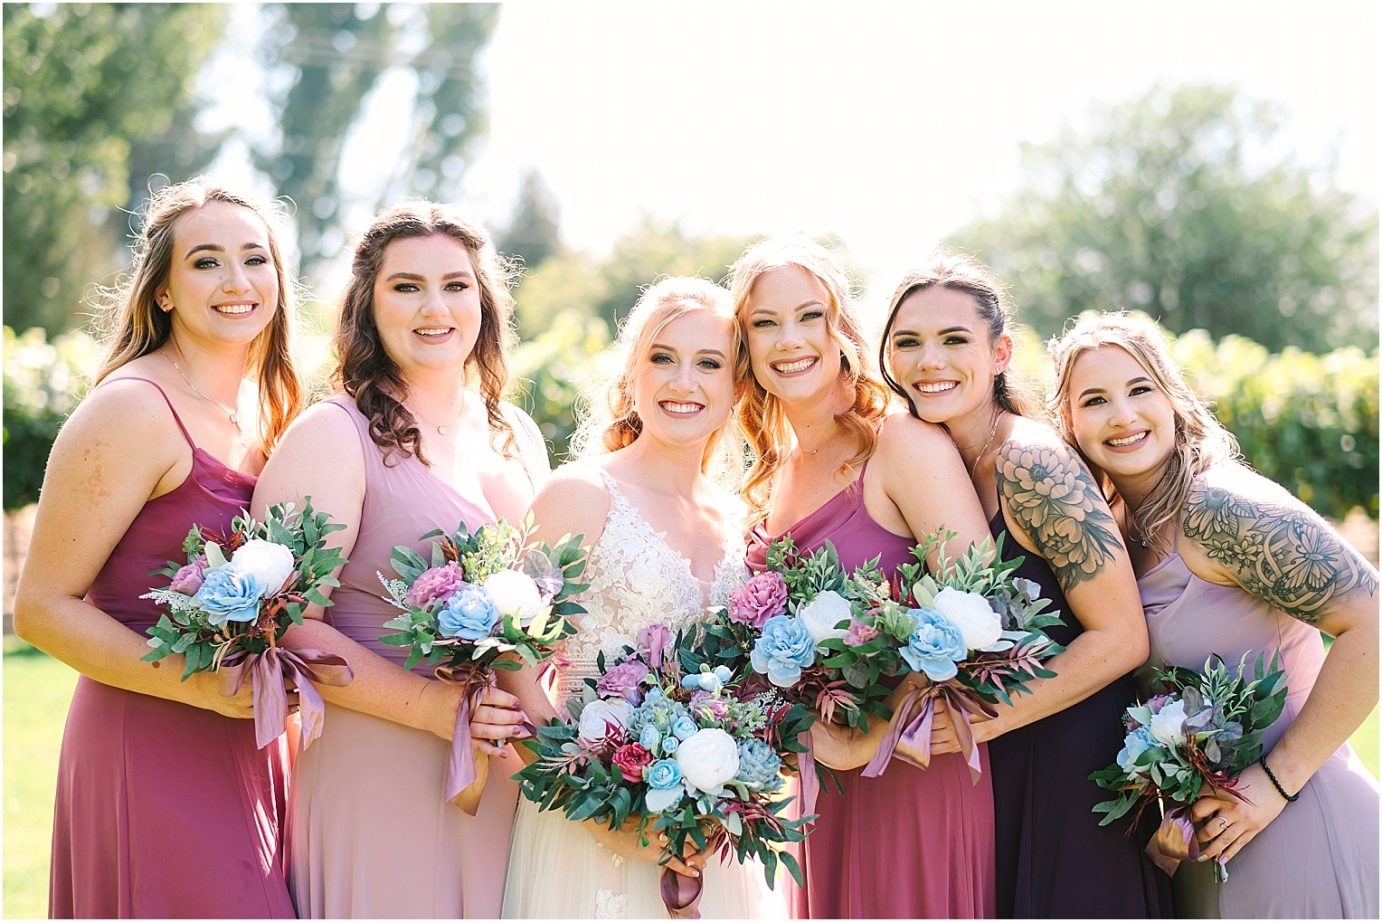 Wedding at Sugar Pine Barn - bride and bridesmaids wearing different colors of purple